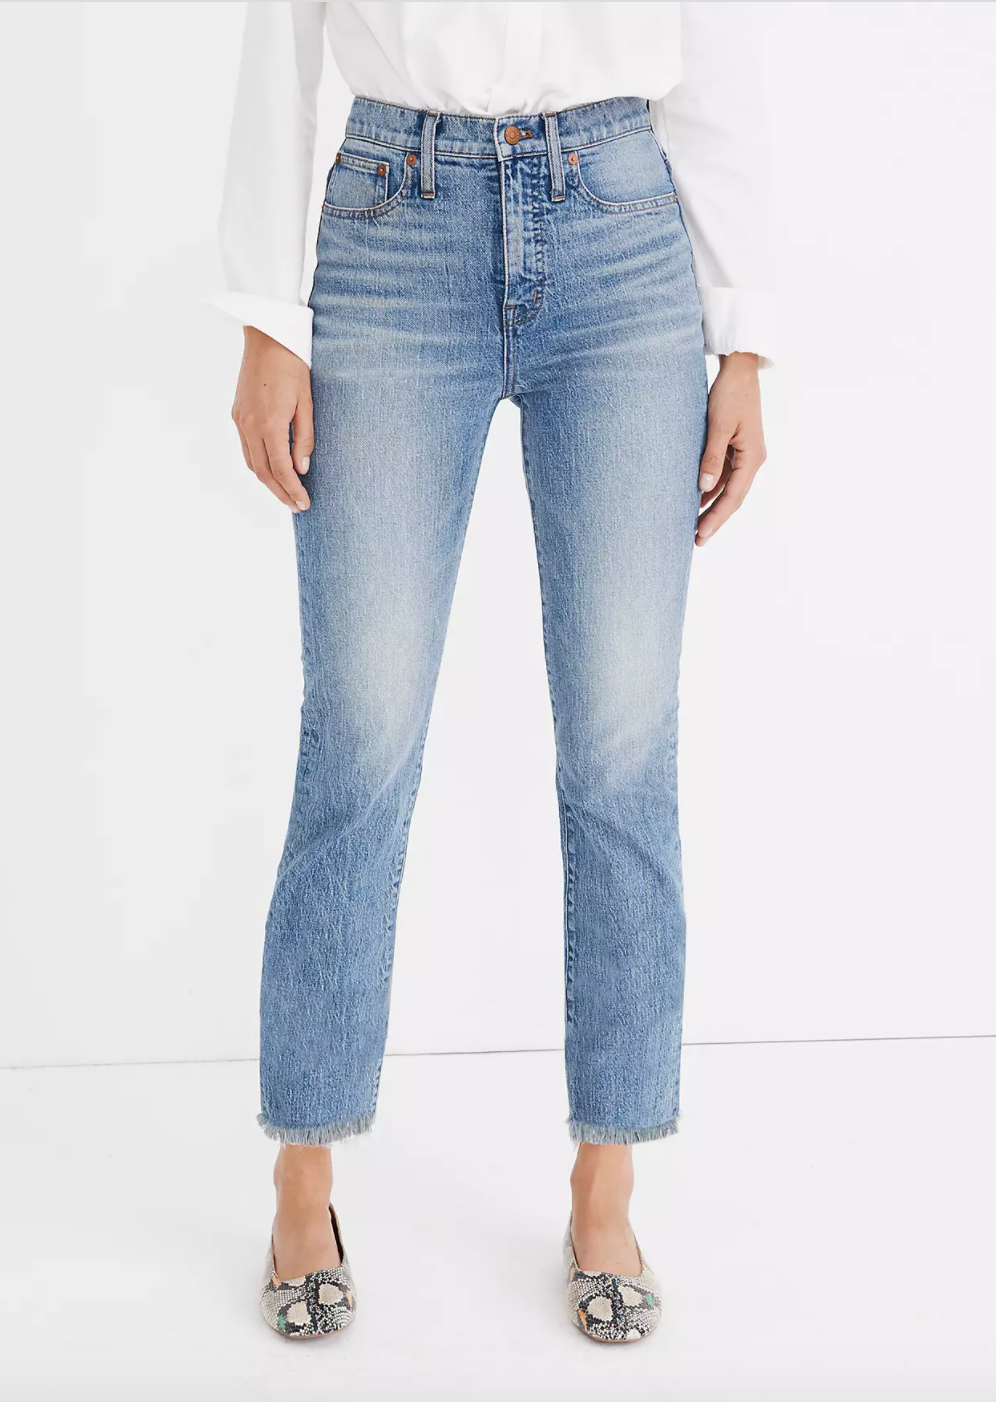 Madewell + The Perfect Vintage Jean in Ainsworth Wash